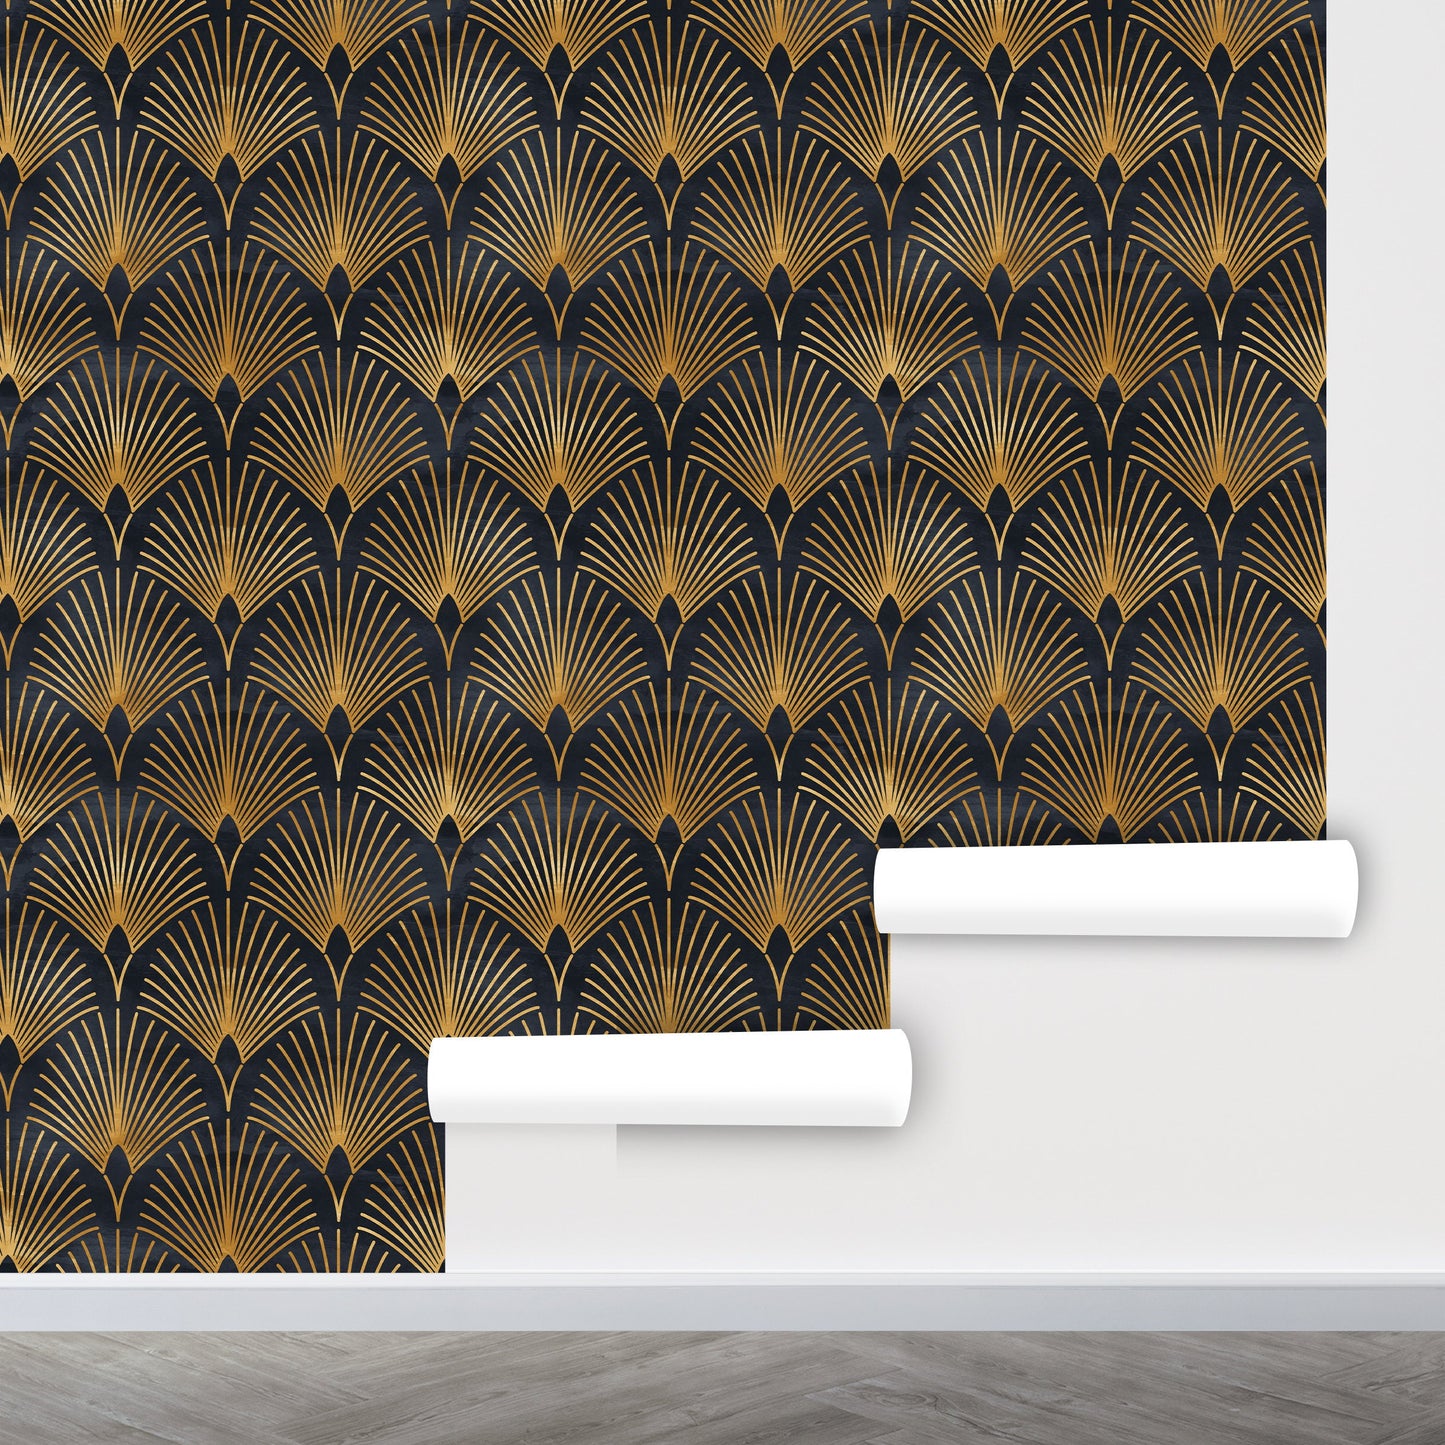 Arches Wallpaper Peel and Stick, Black Gold Wallpaper, Art Deco Wallpaper, Removable Wall Paper